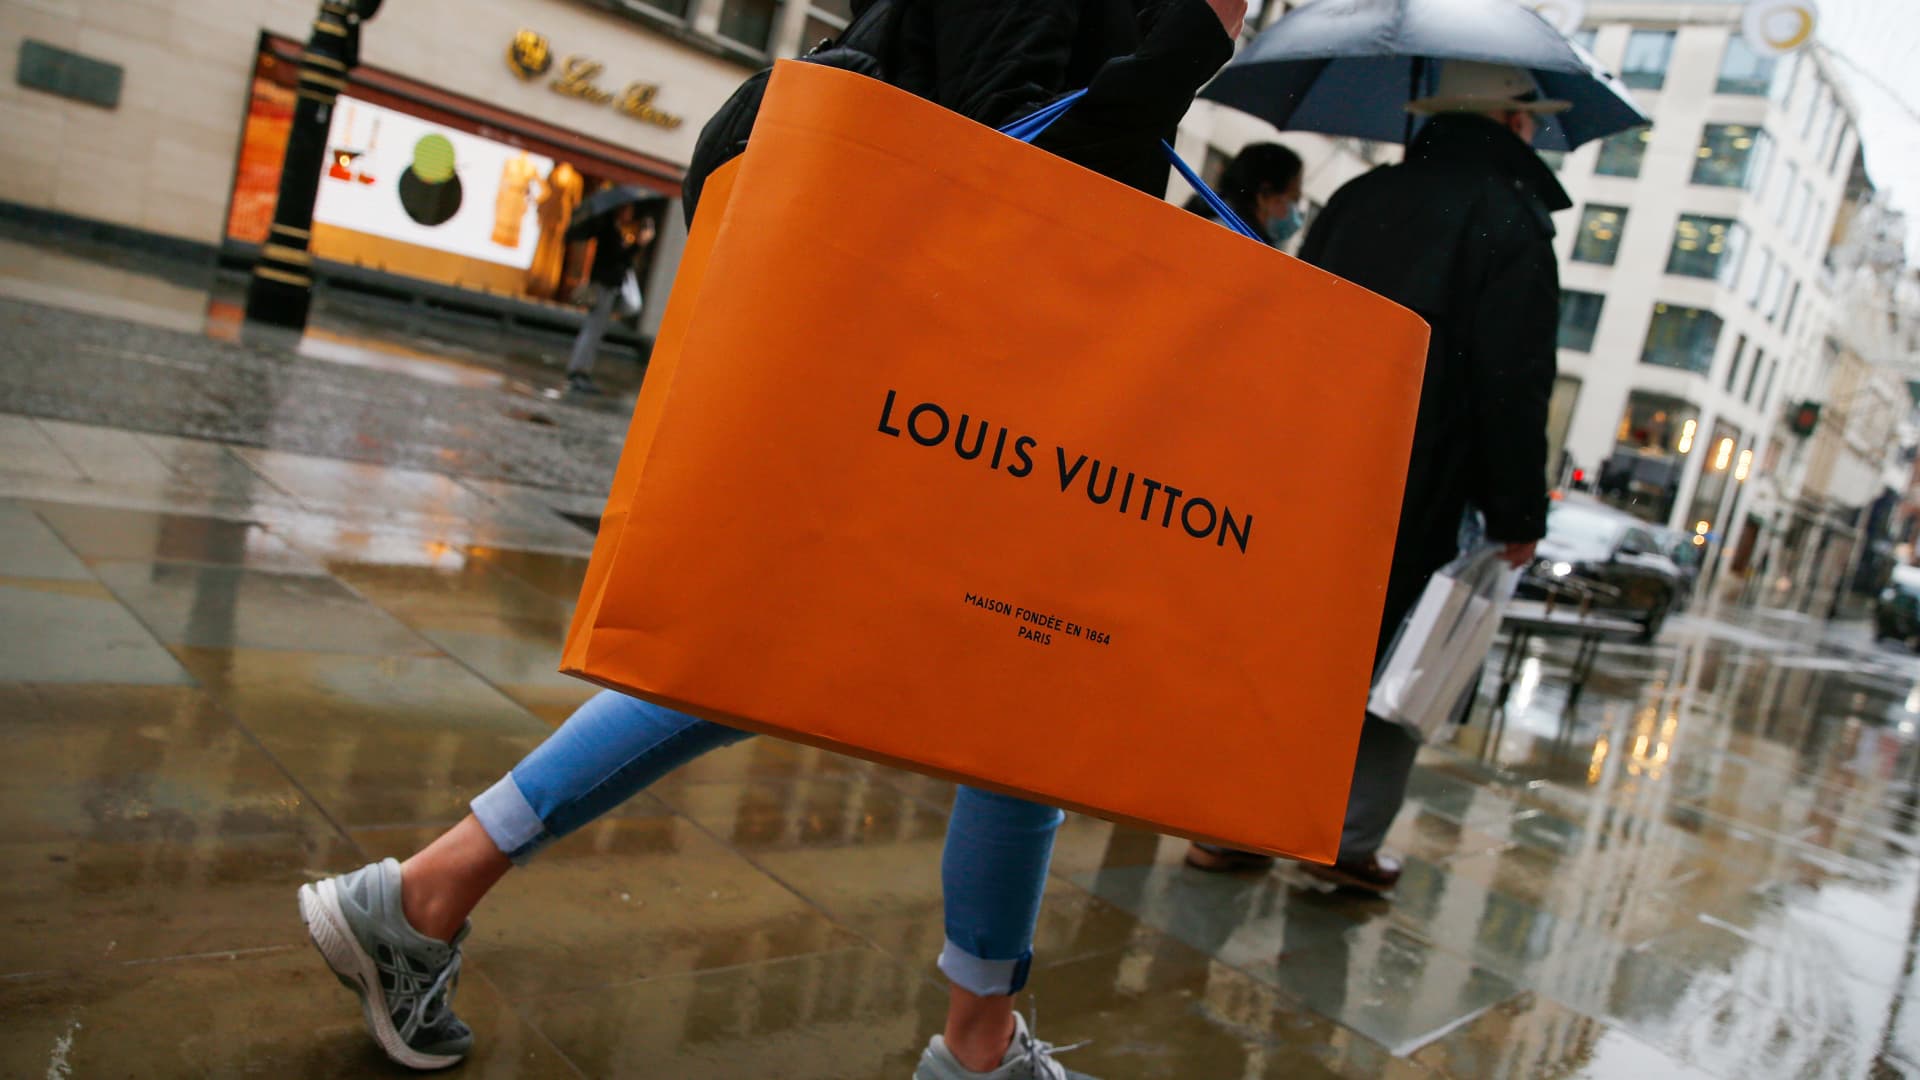 Amid a recession and a pandemic, Louis Vuitton has increased the